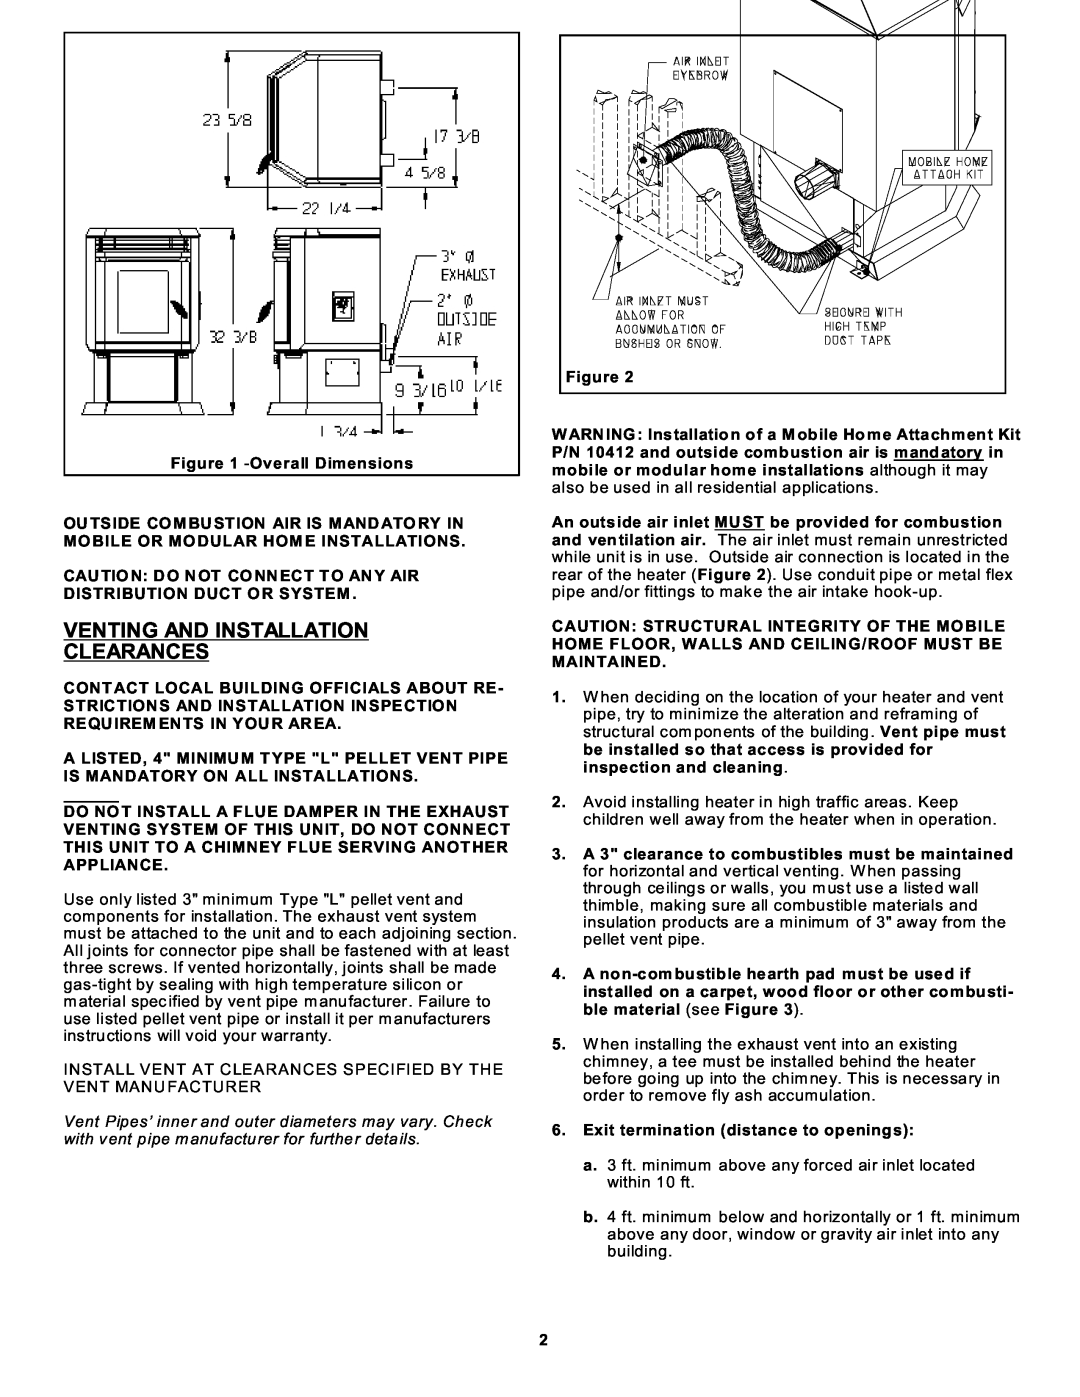 Sierra Products EF-3801B-AL owner manual Venting And Installation Clearances 